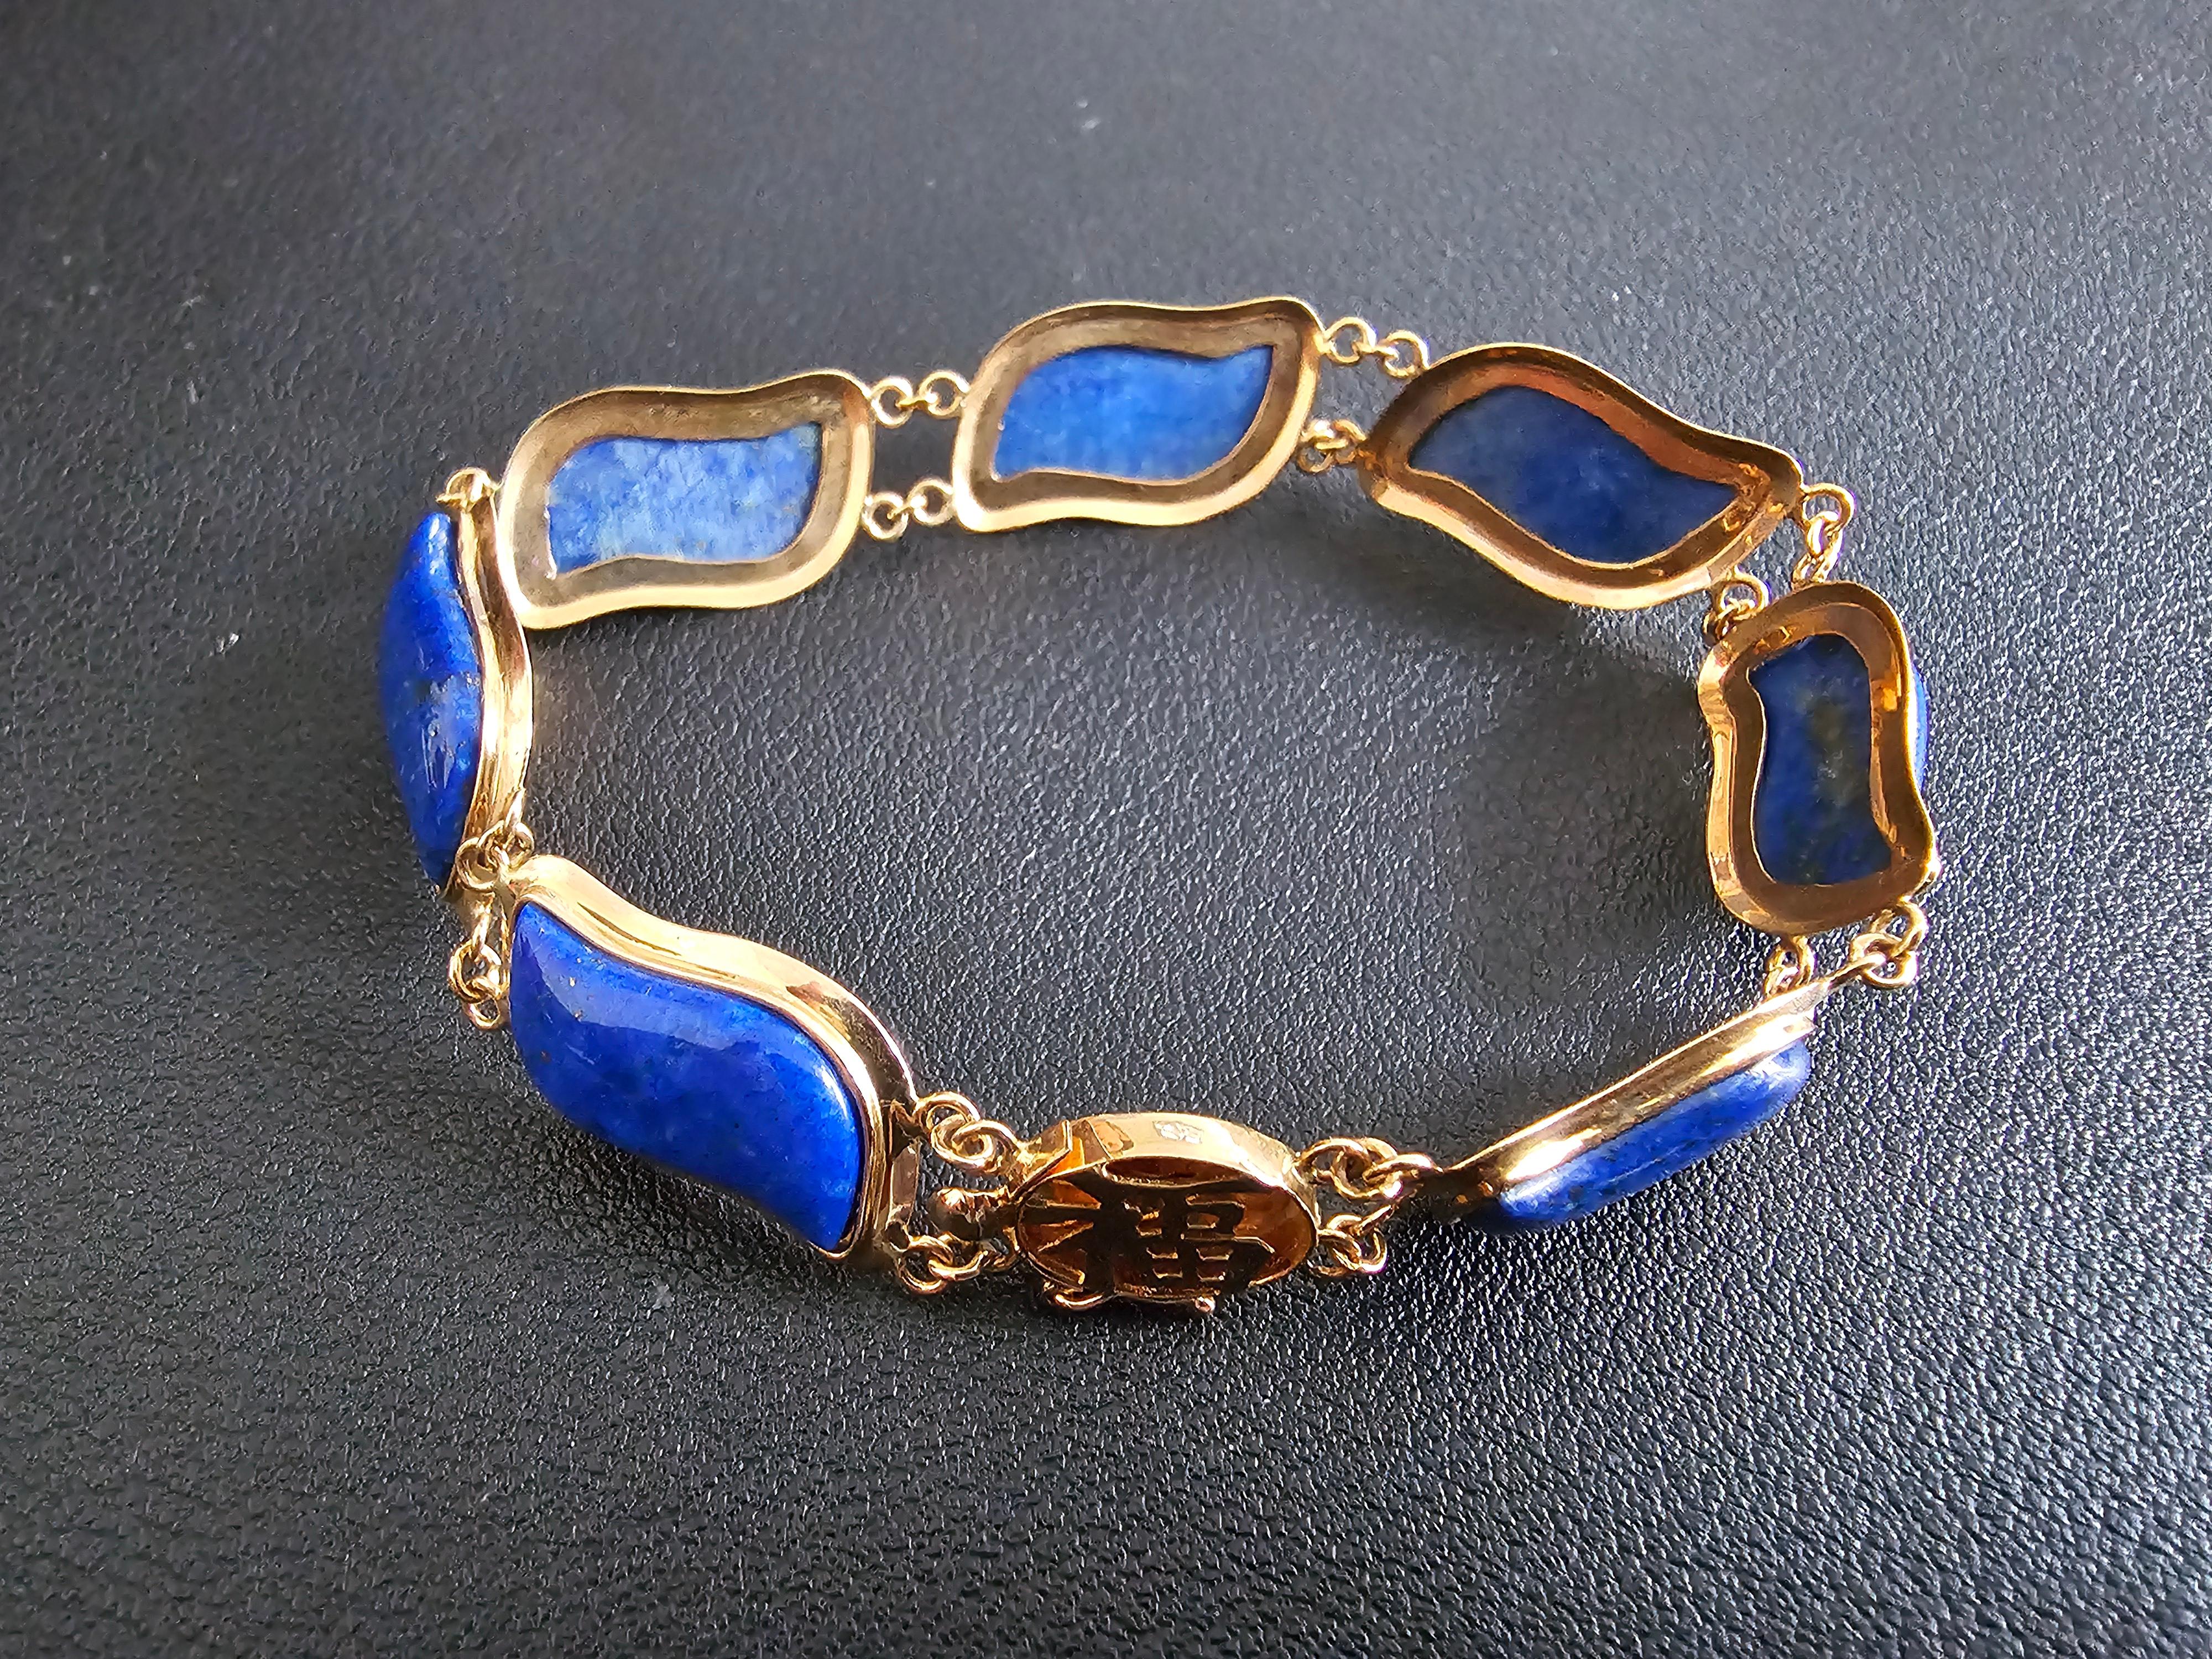 Blue Lapis Lazuli Bracelet Aurora Double Chained with 14K Solid Yellow Gold For Sale 1